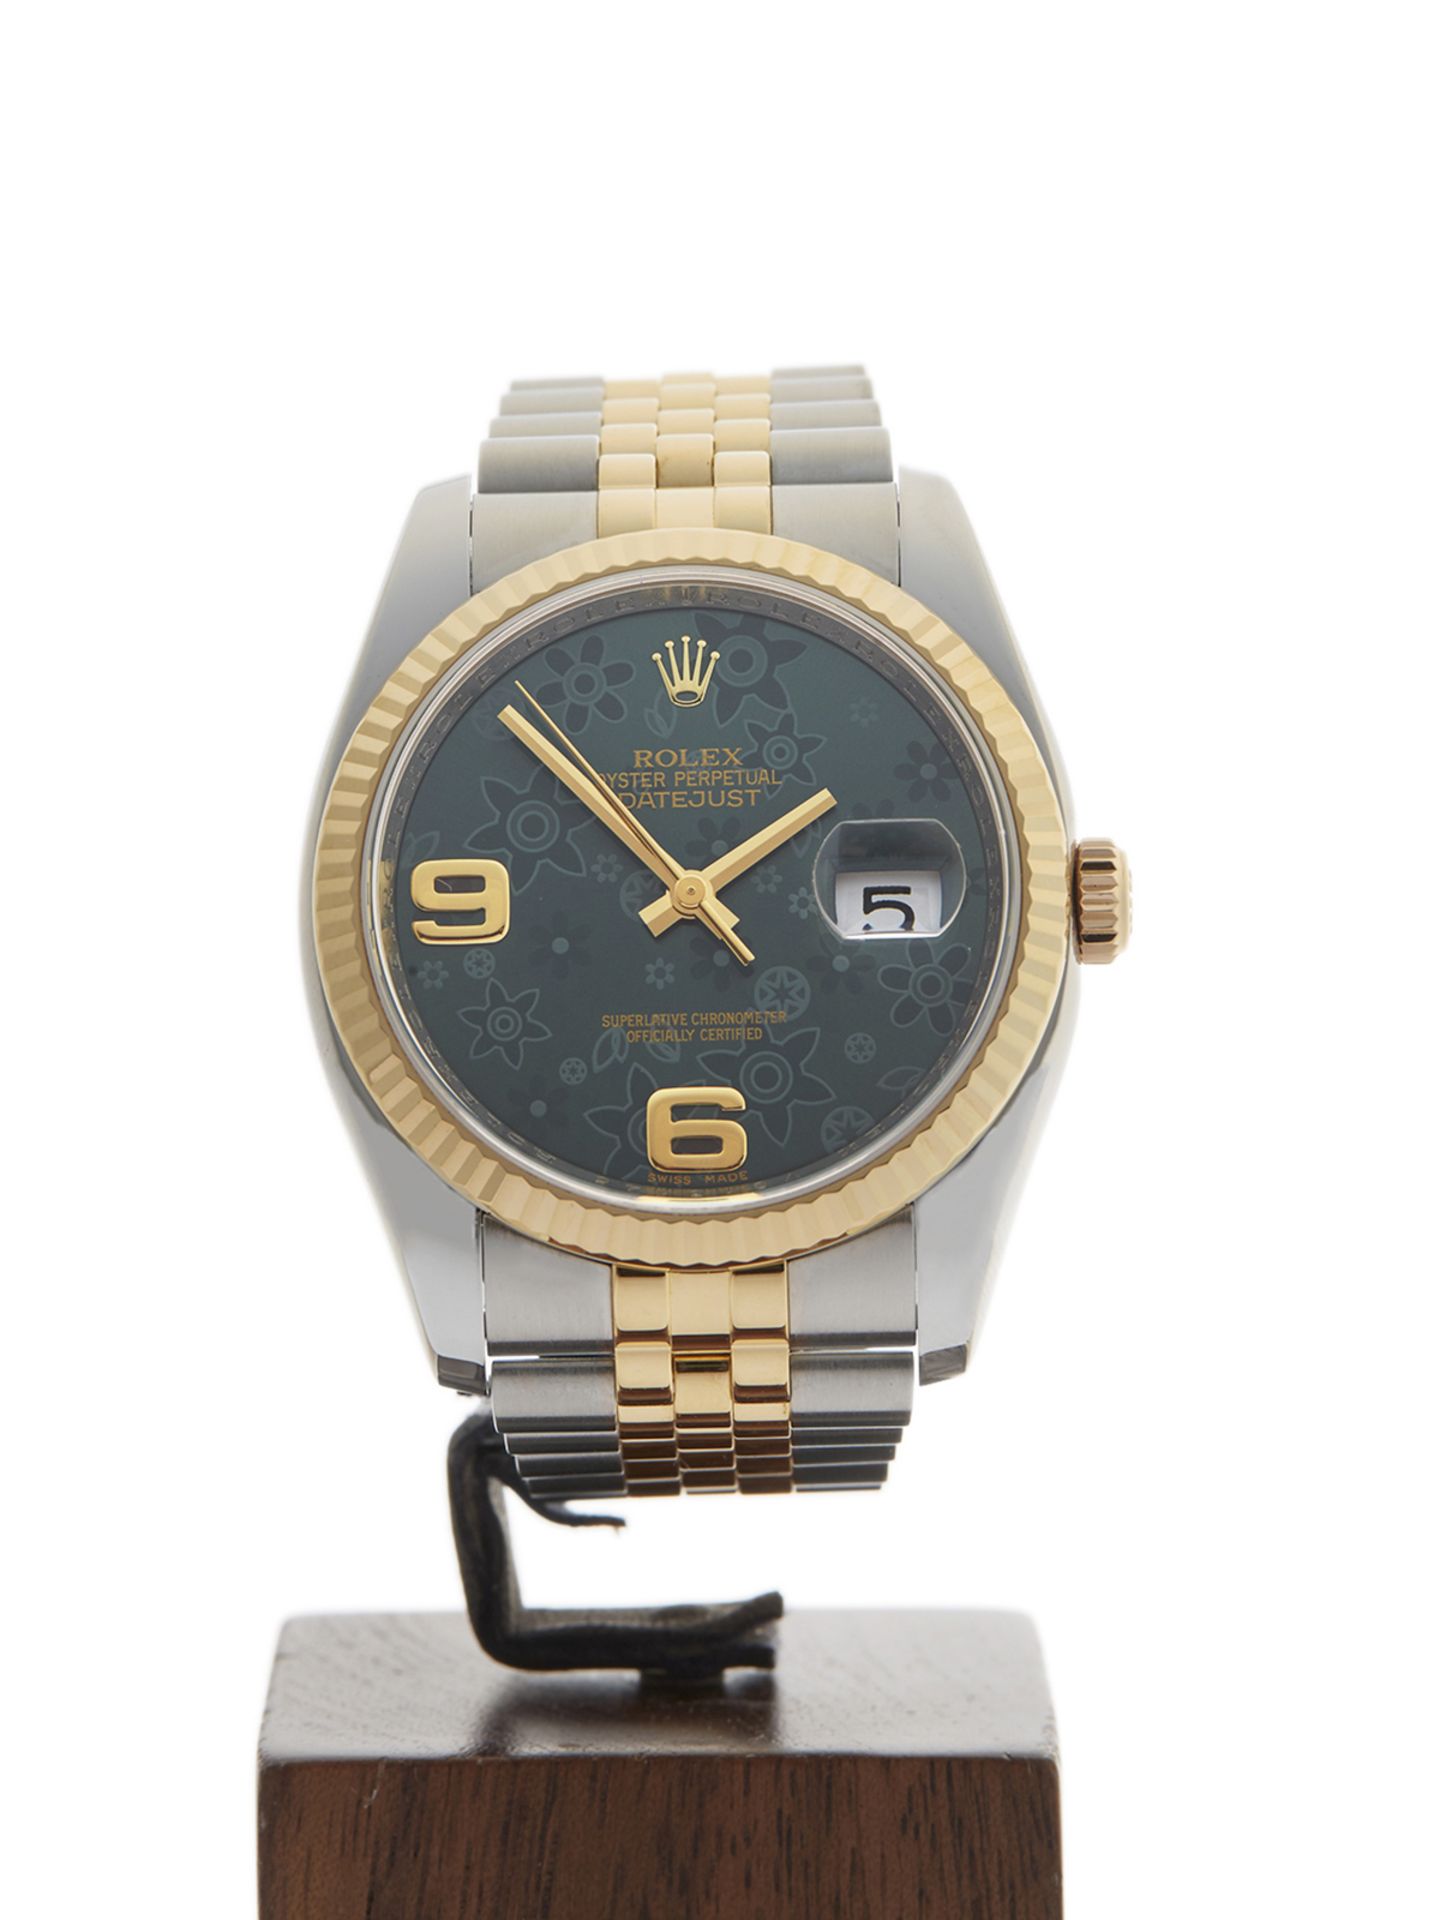 Rolex Datejust 36mm Stainless Steel & 18k Yellow Gold 116233 - Image 2 of 9